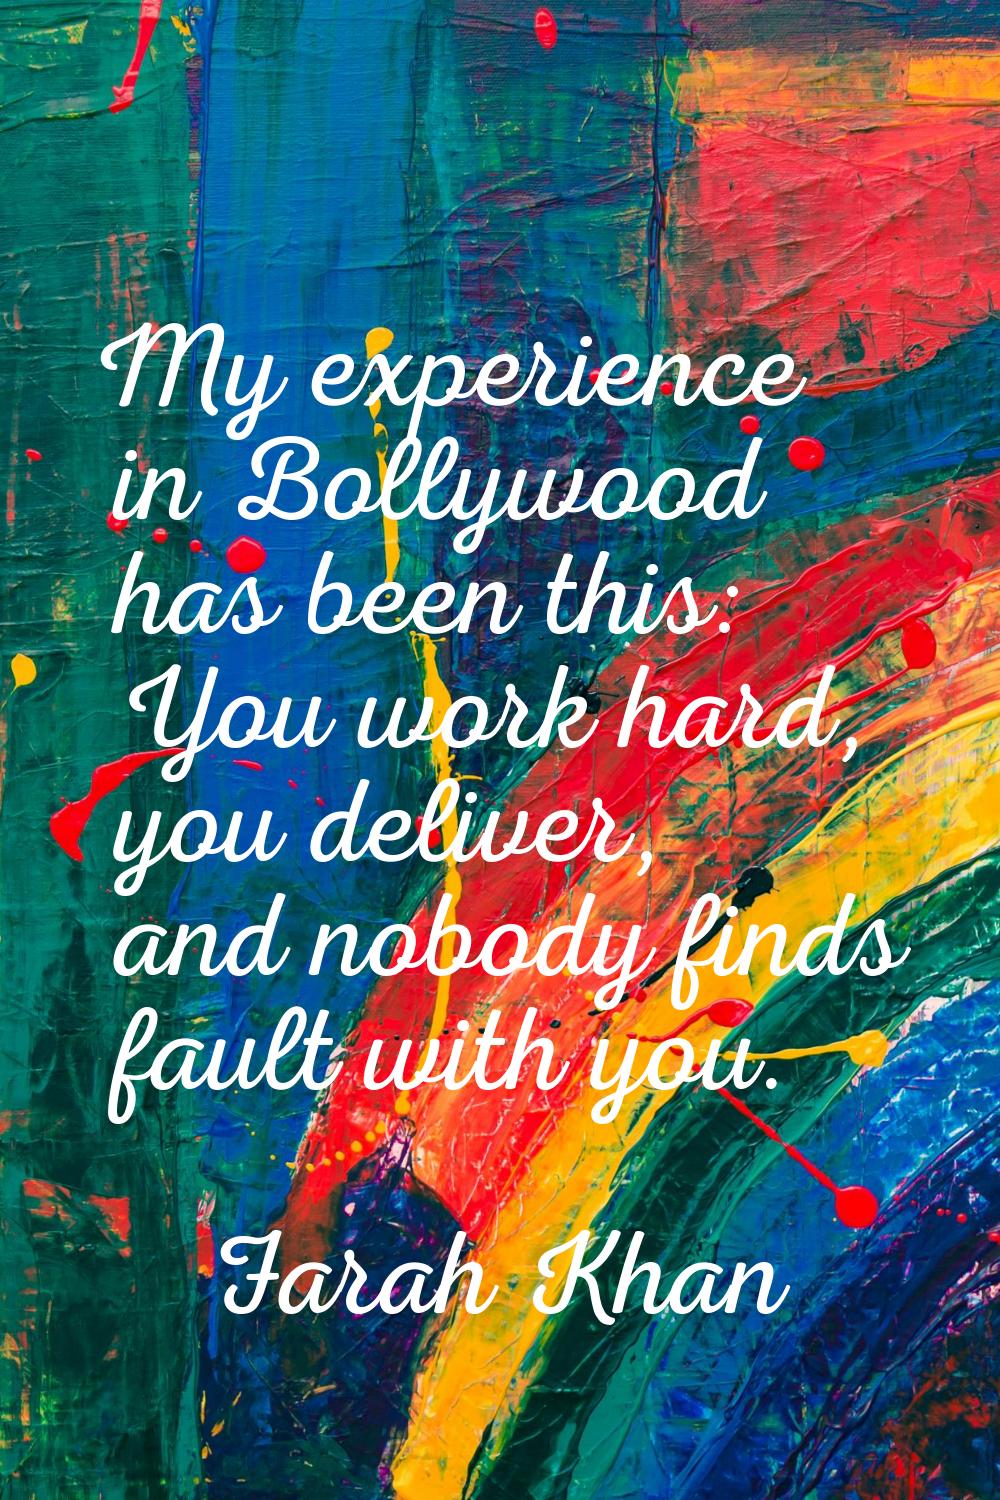 My experience in Bollywood has been this: You work hard, you deliver, and nobody finds fault with y